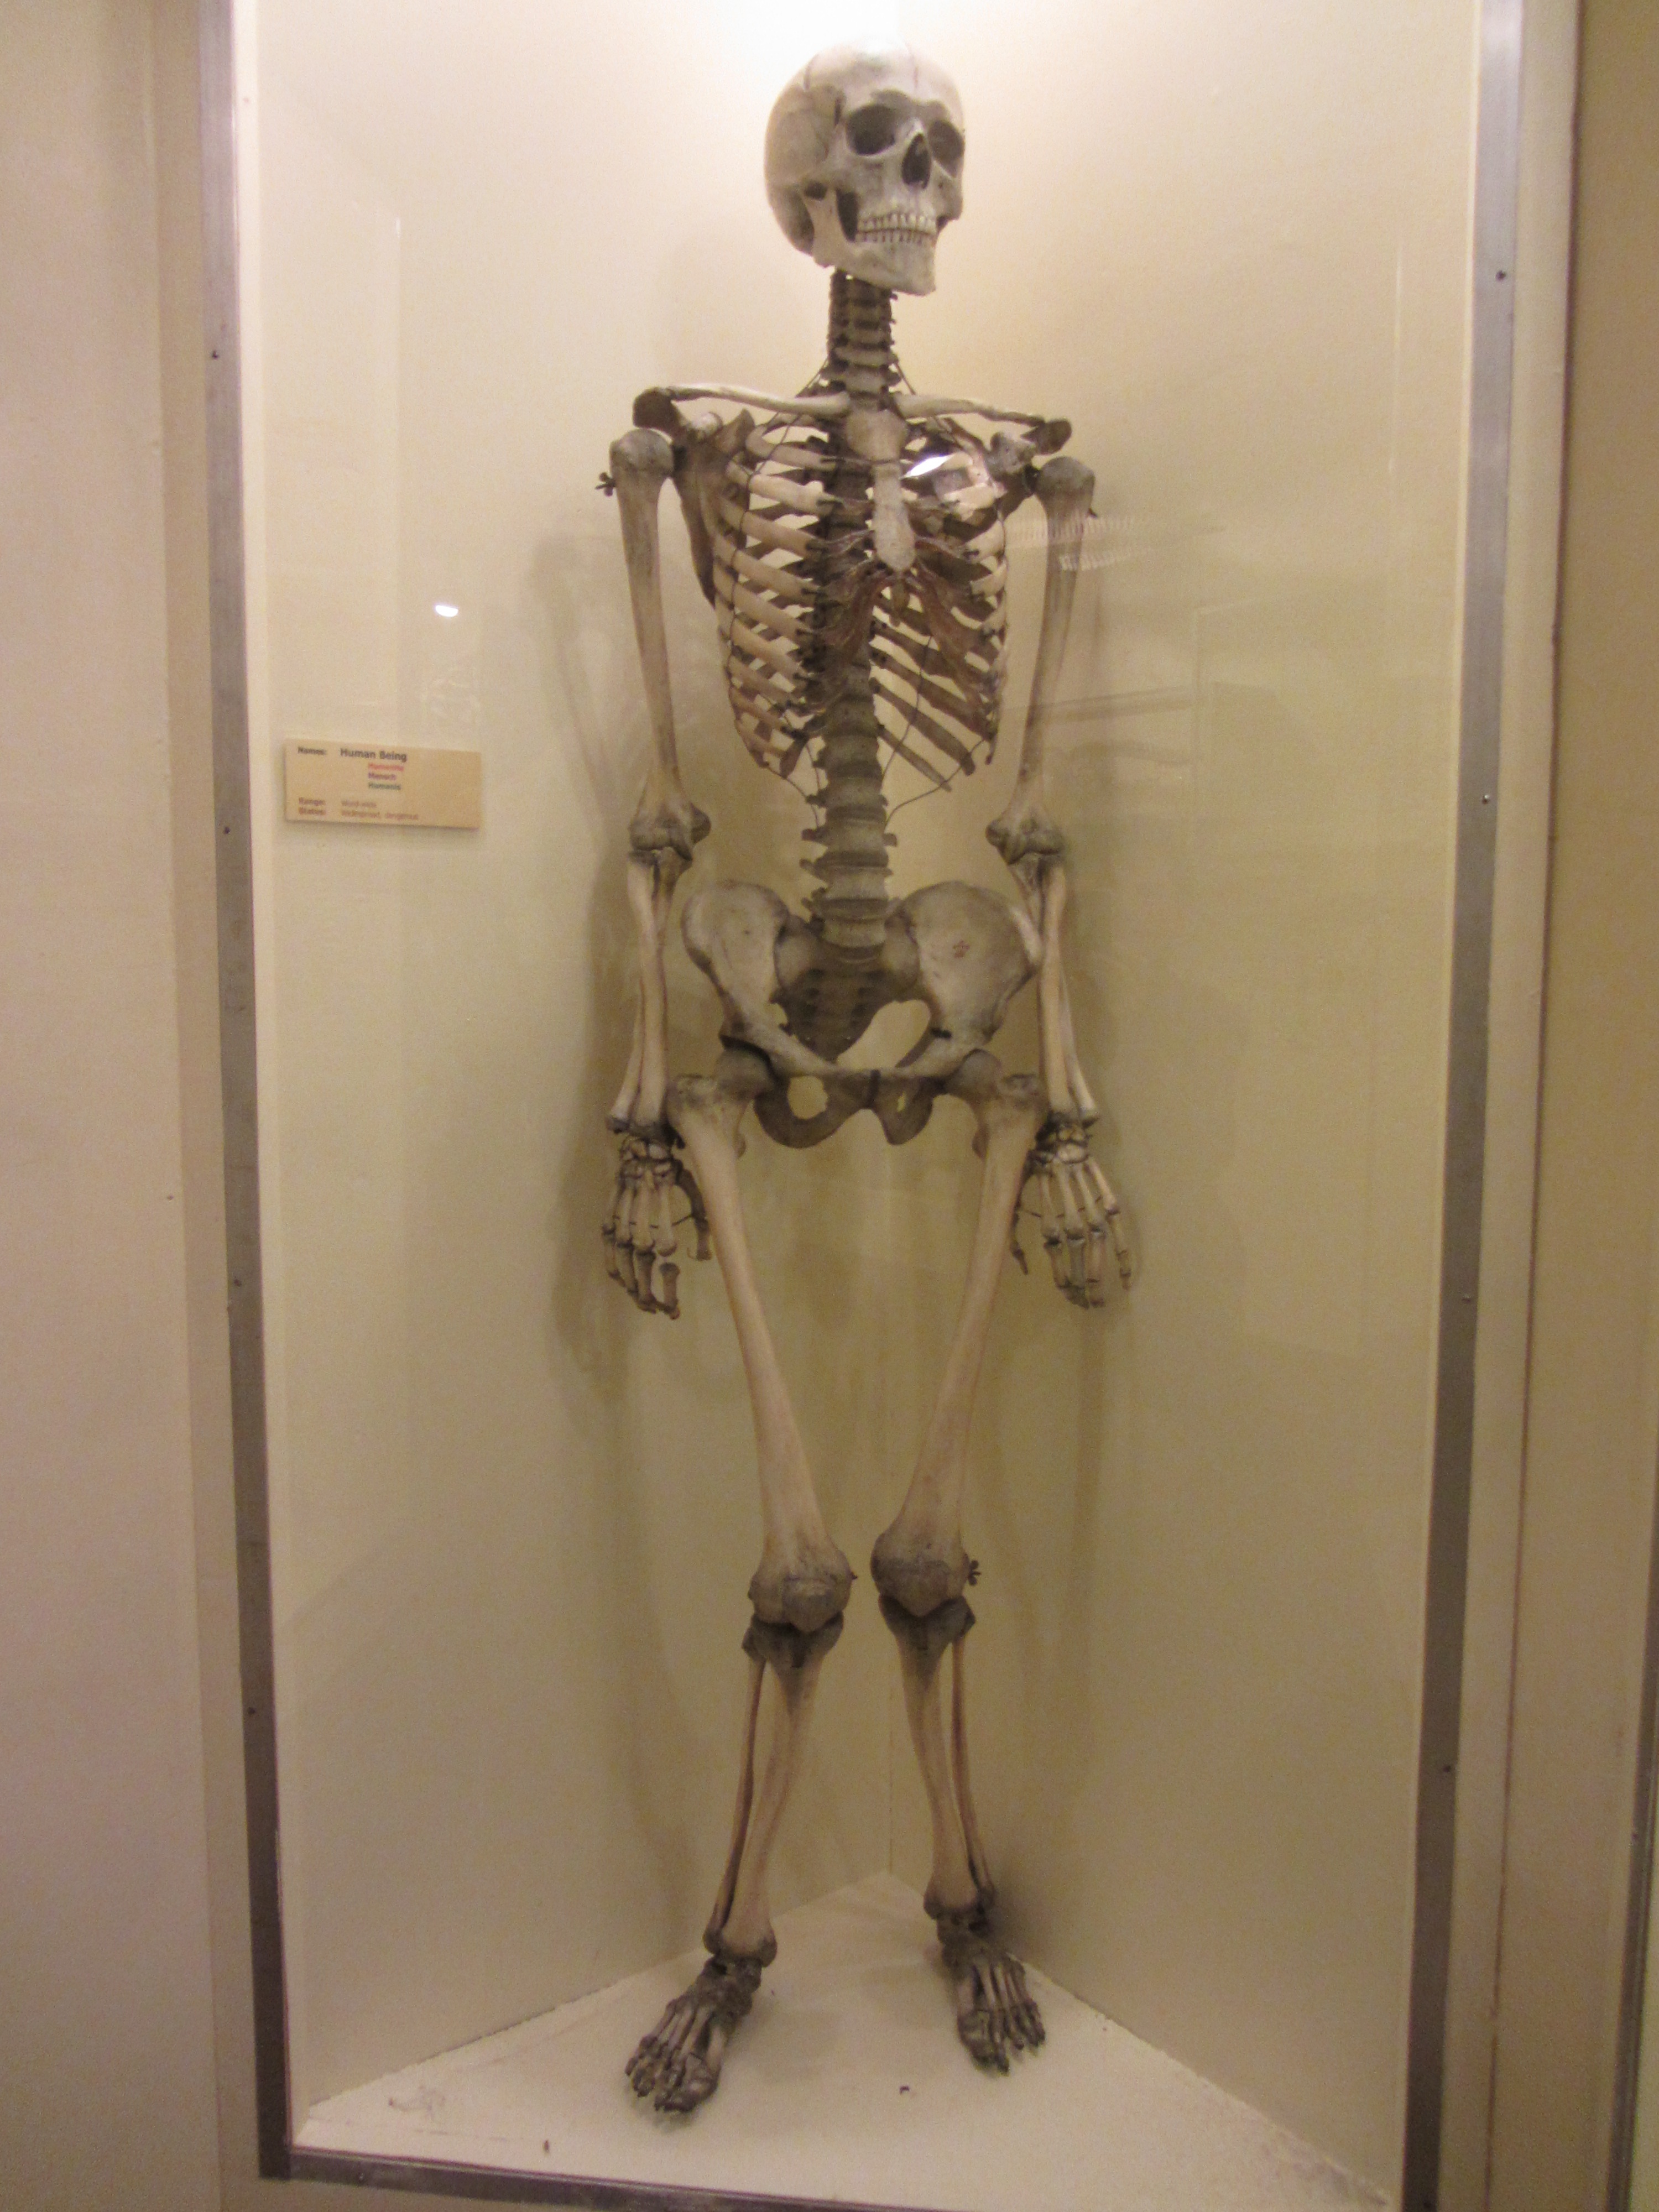 Human_skeleton_-Booth_Museum,_Brighton_and_Hove,_East_Sussex,_England-20Oct2011.jpg